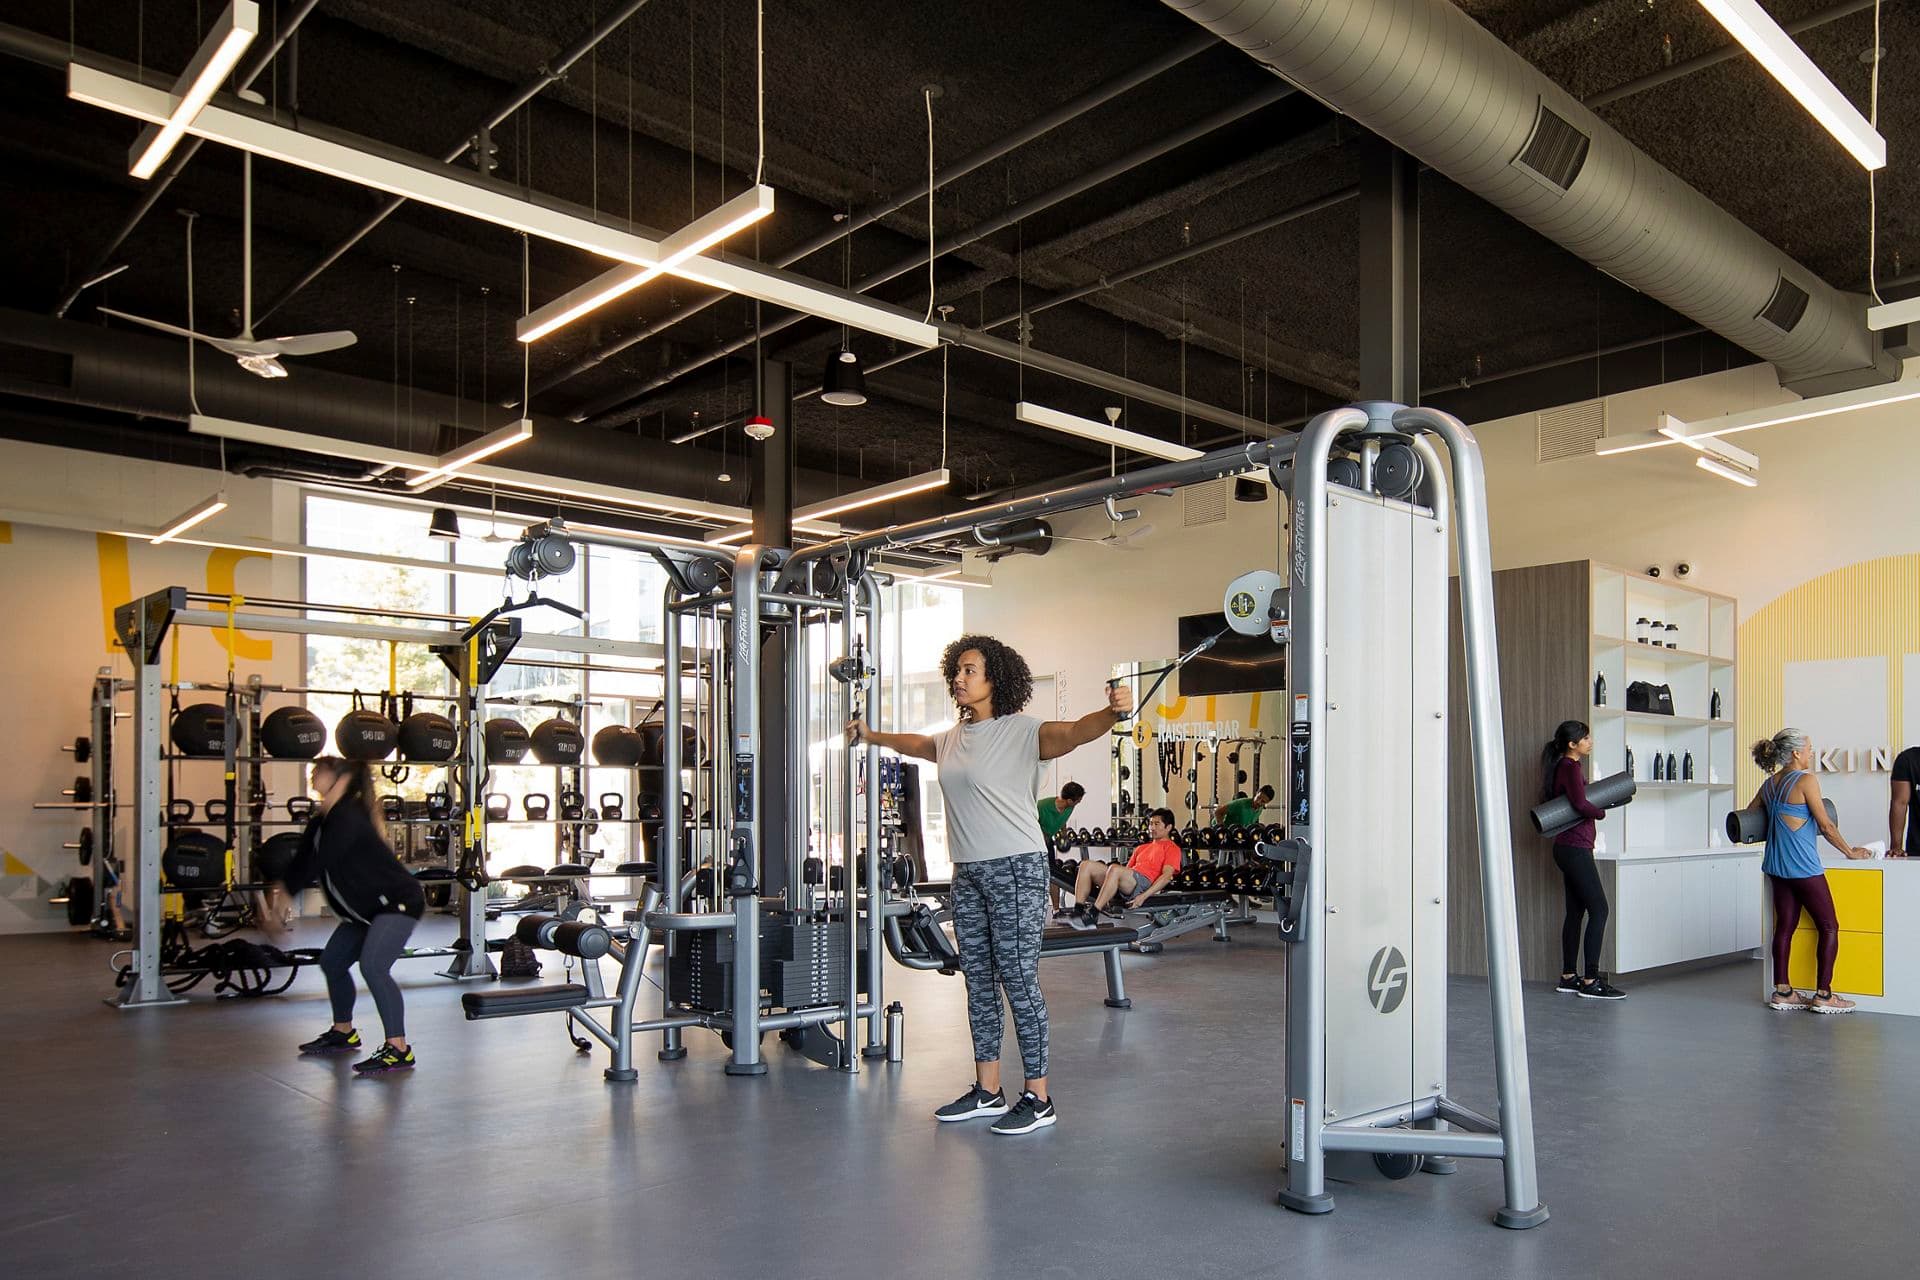 View of people working out at Kinetic Fitness Center at Pathline Park in Sunnyvale, CA.